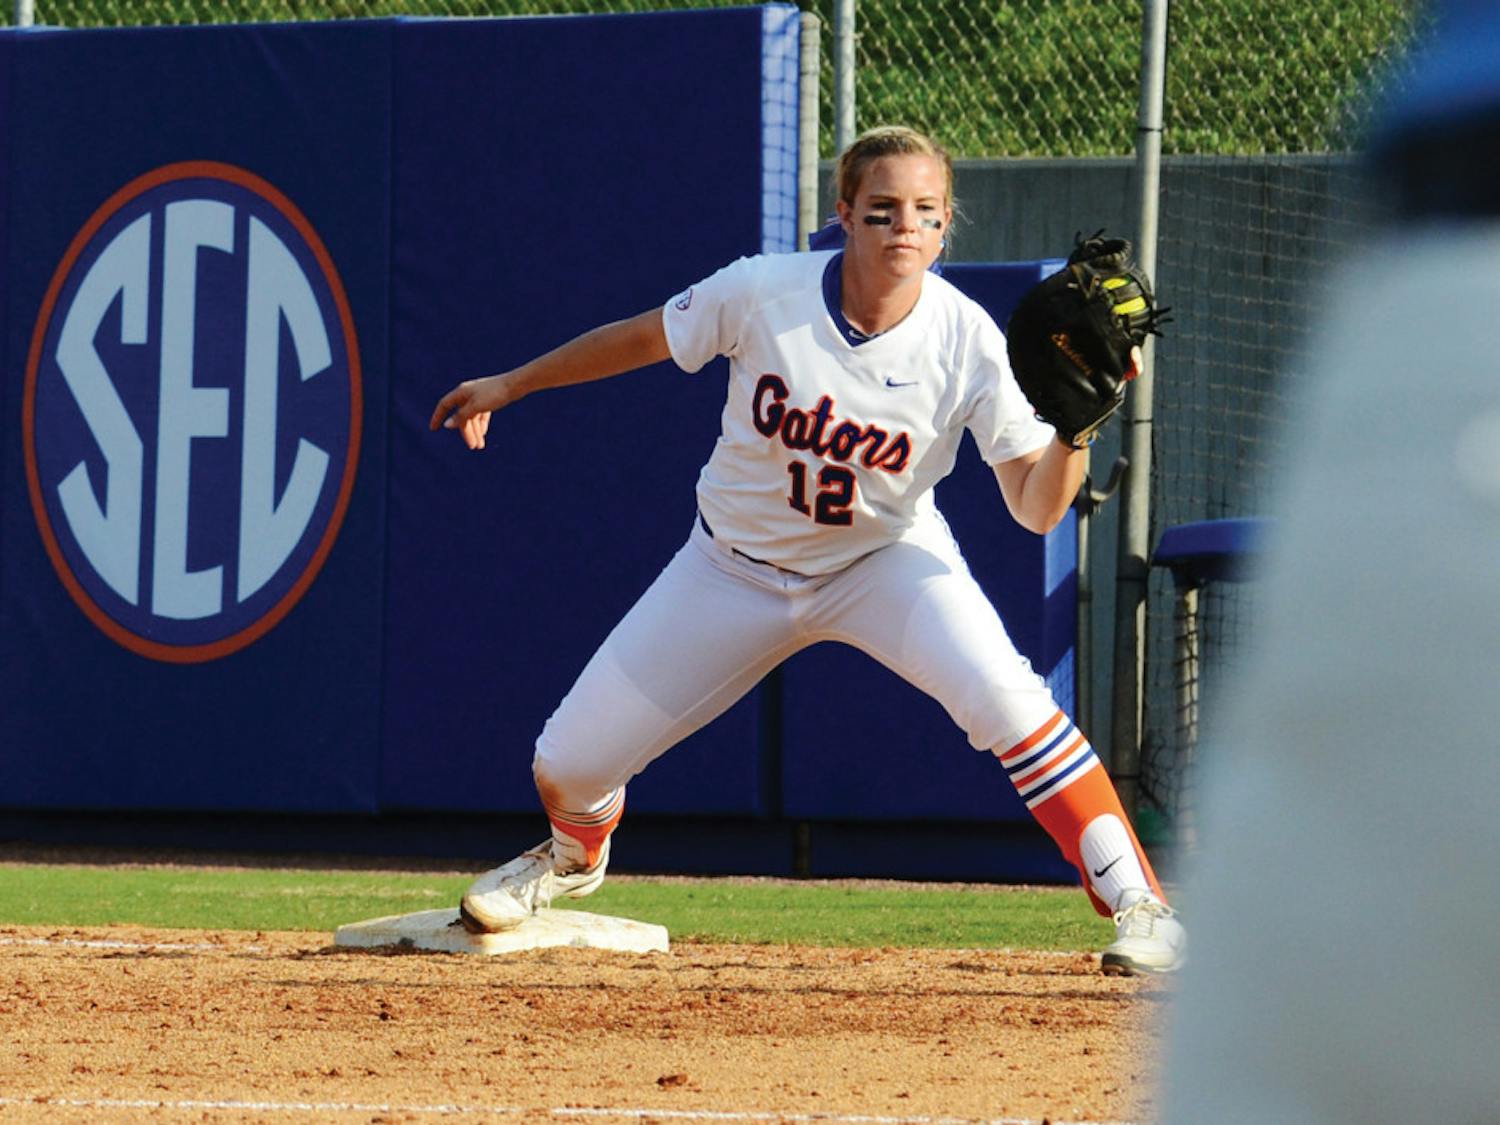 Florida’s senior first baseman said she has experimented with “close to 30 bats” since the NCAA banned the Easton Synergy Speed on April 29.